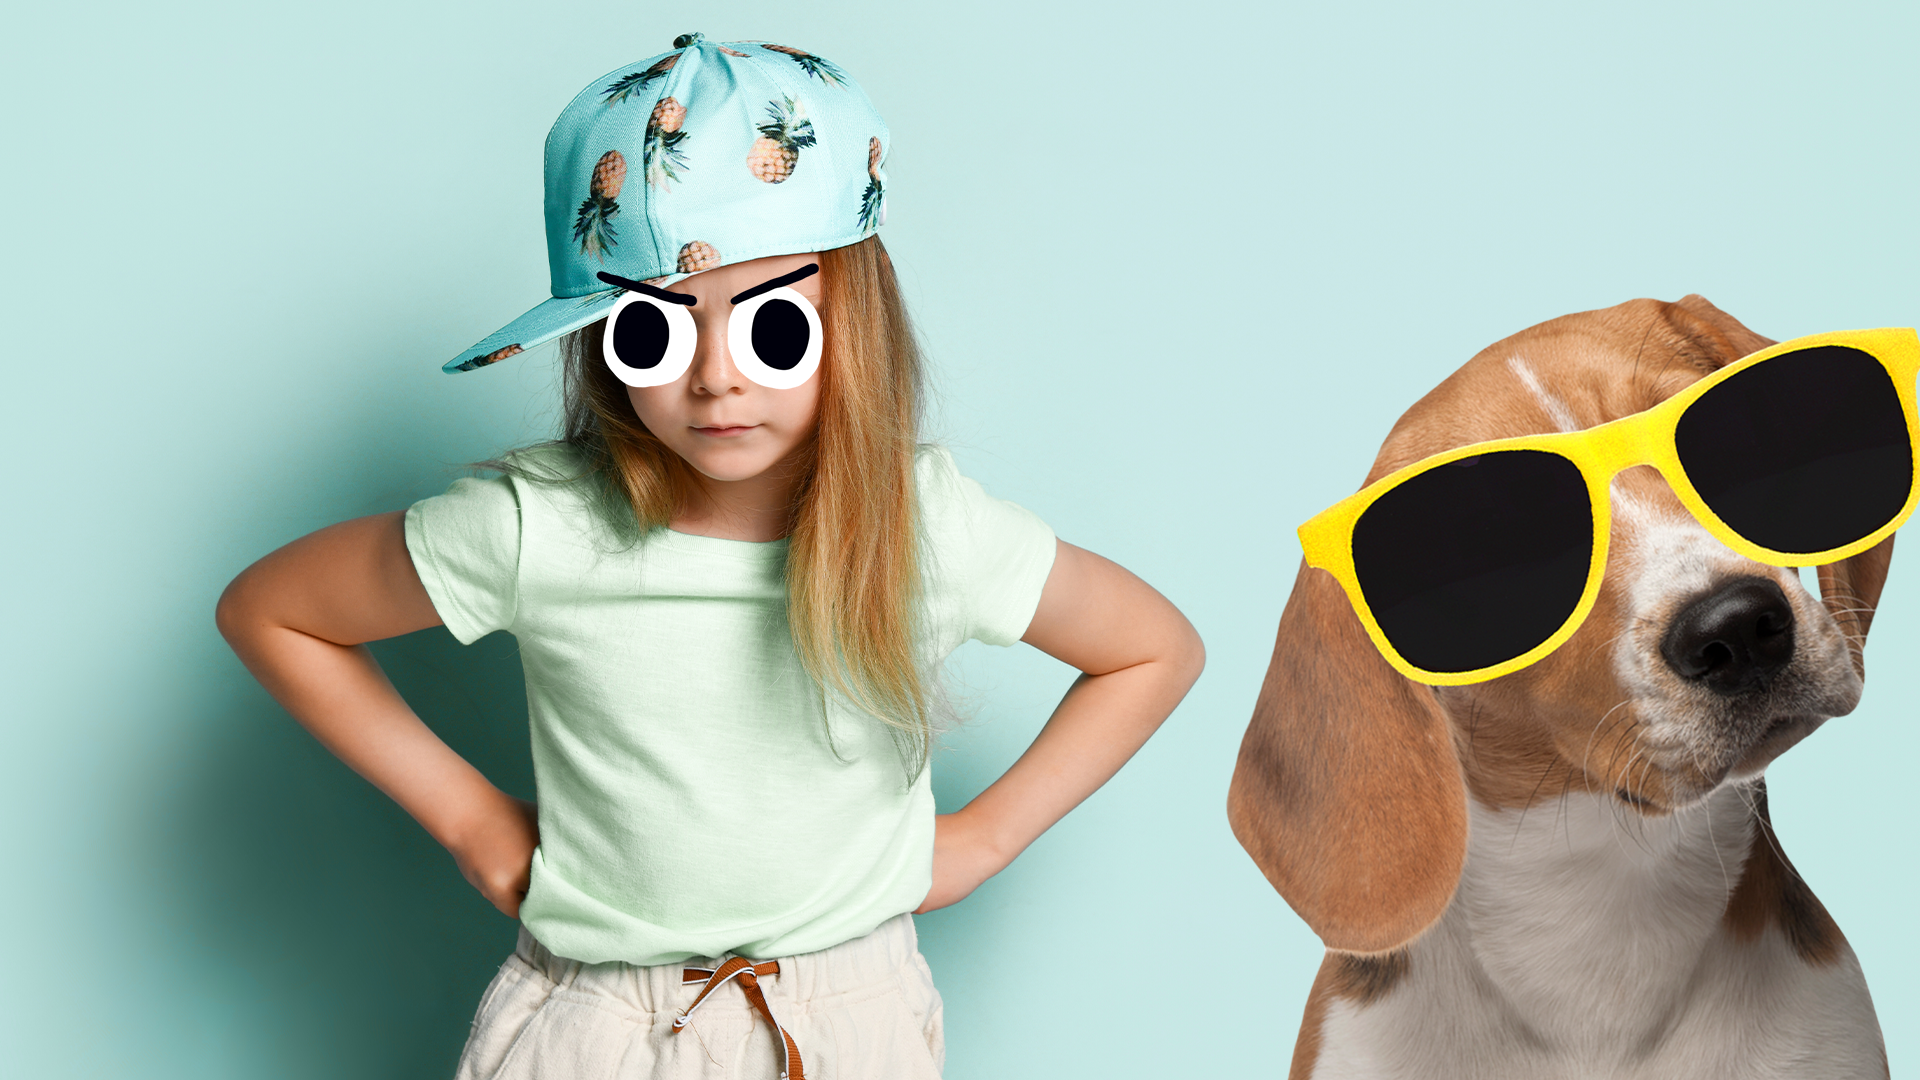 Grumpy looking girl on blue background with cool Beano dog